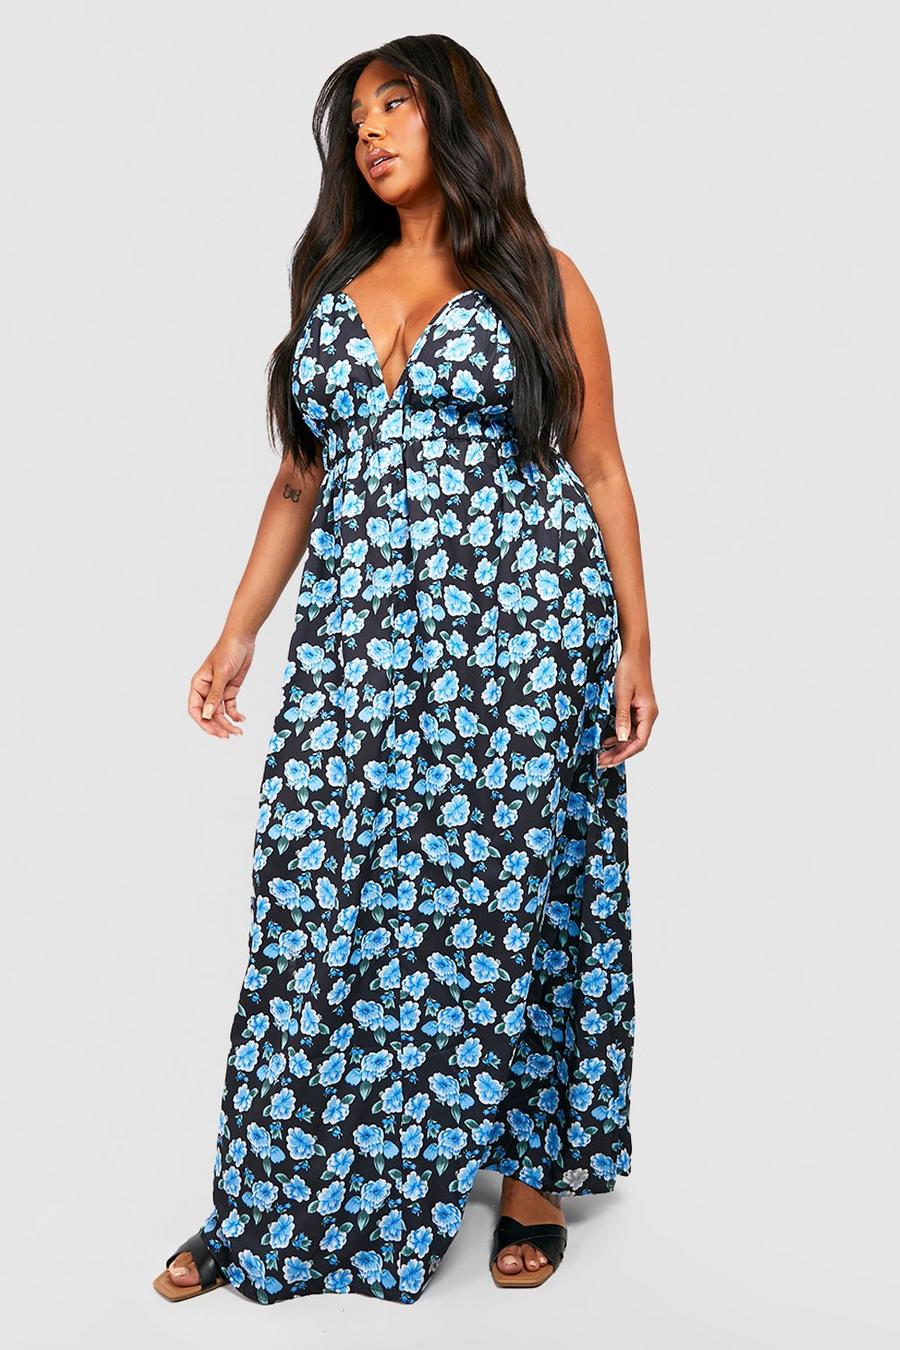 YOURS Plus Size Black Ditsy Floral Strappy Sundress